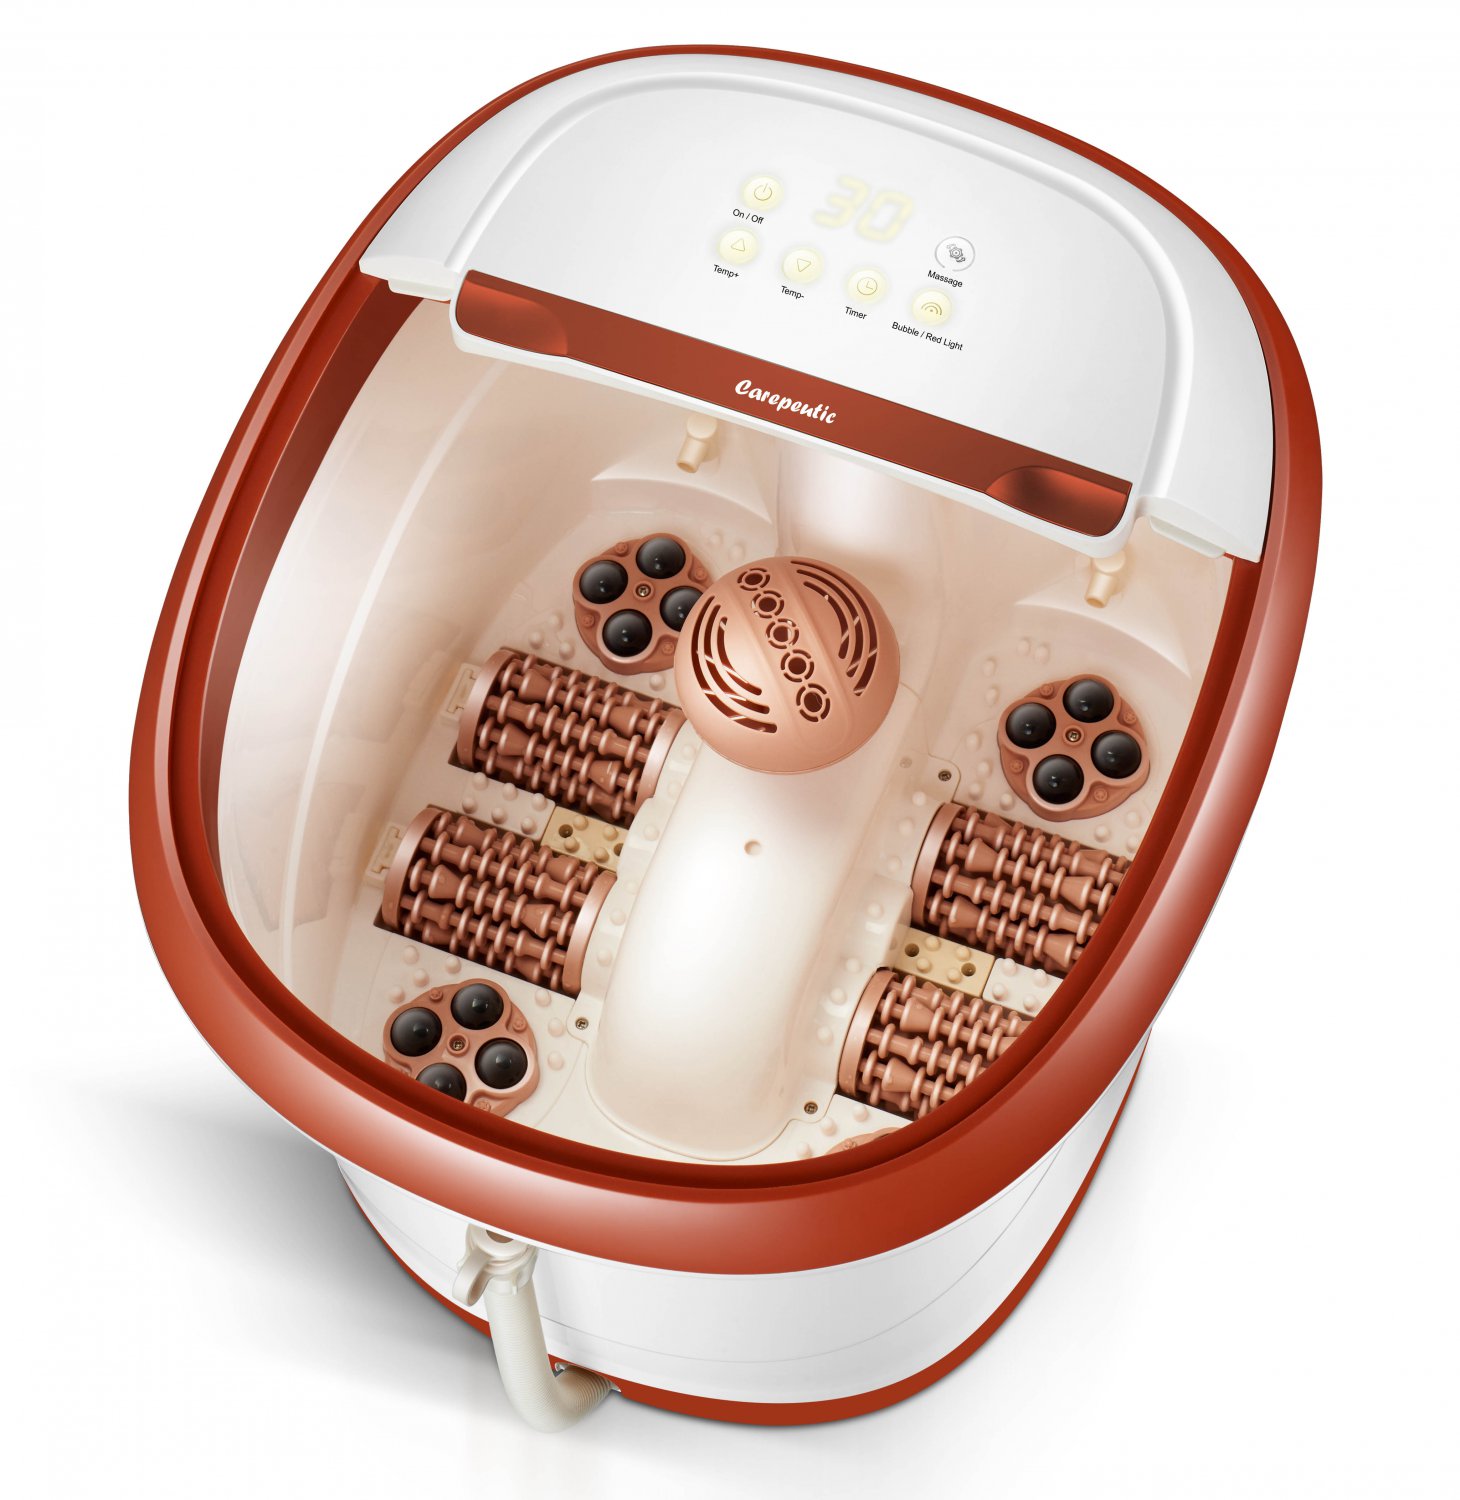 Carepeutic Touch Screen Water Jet Foot And Leg Spa Bath Massager Kh305b Brown